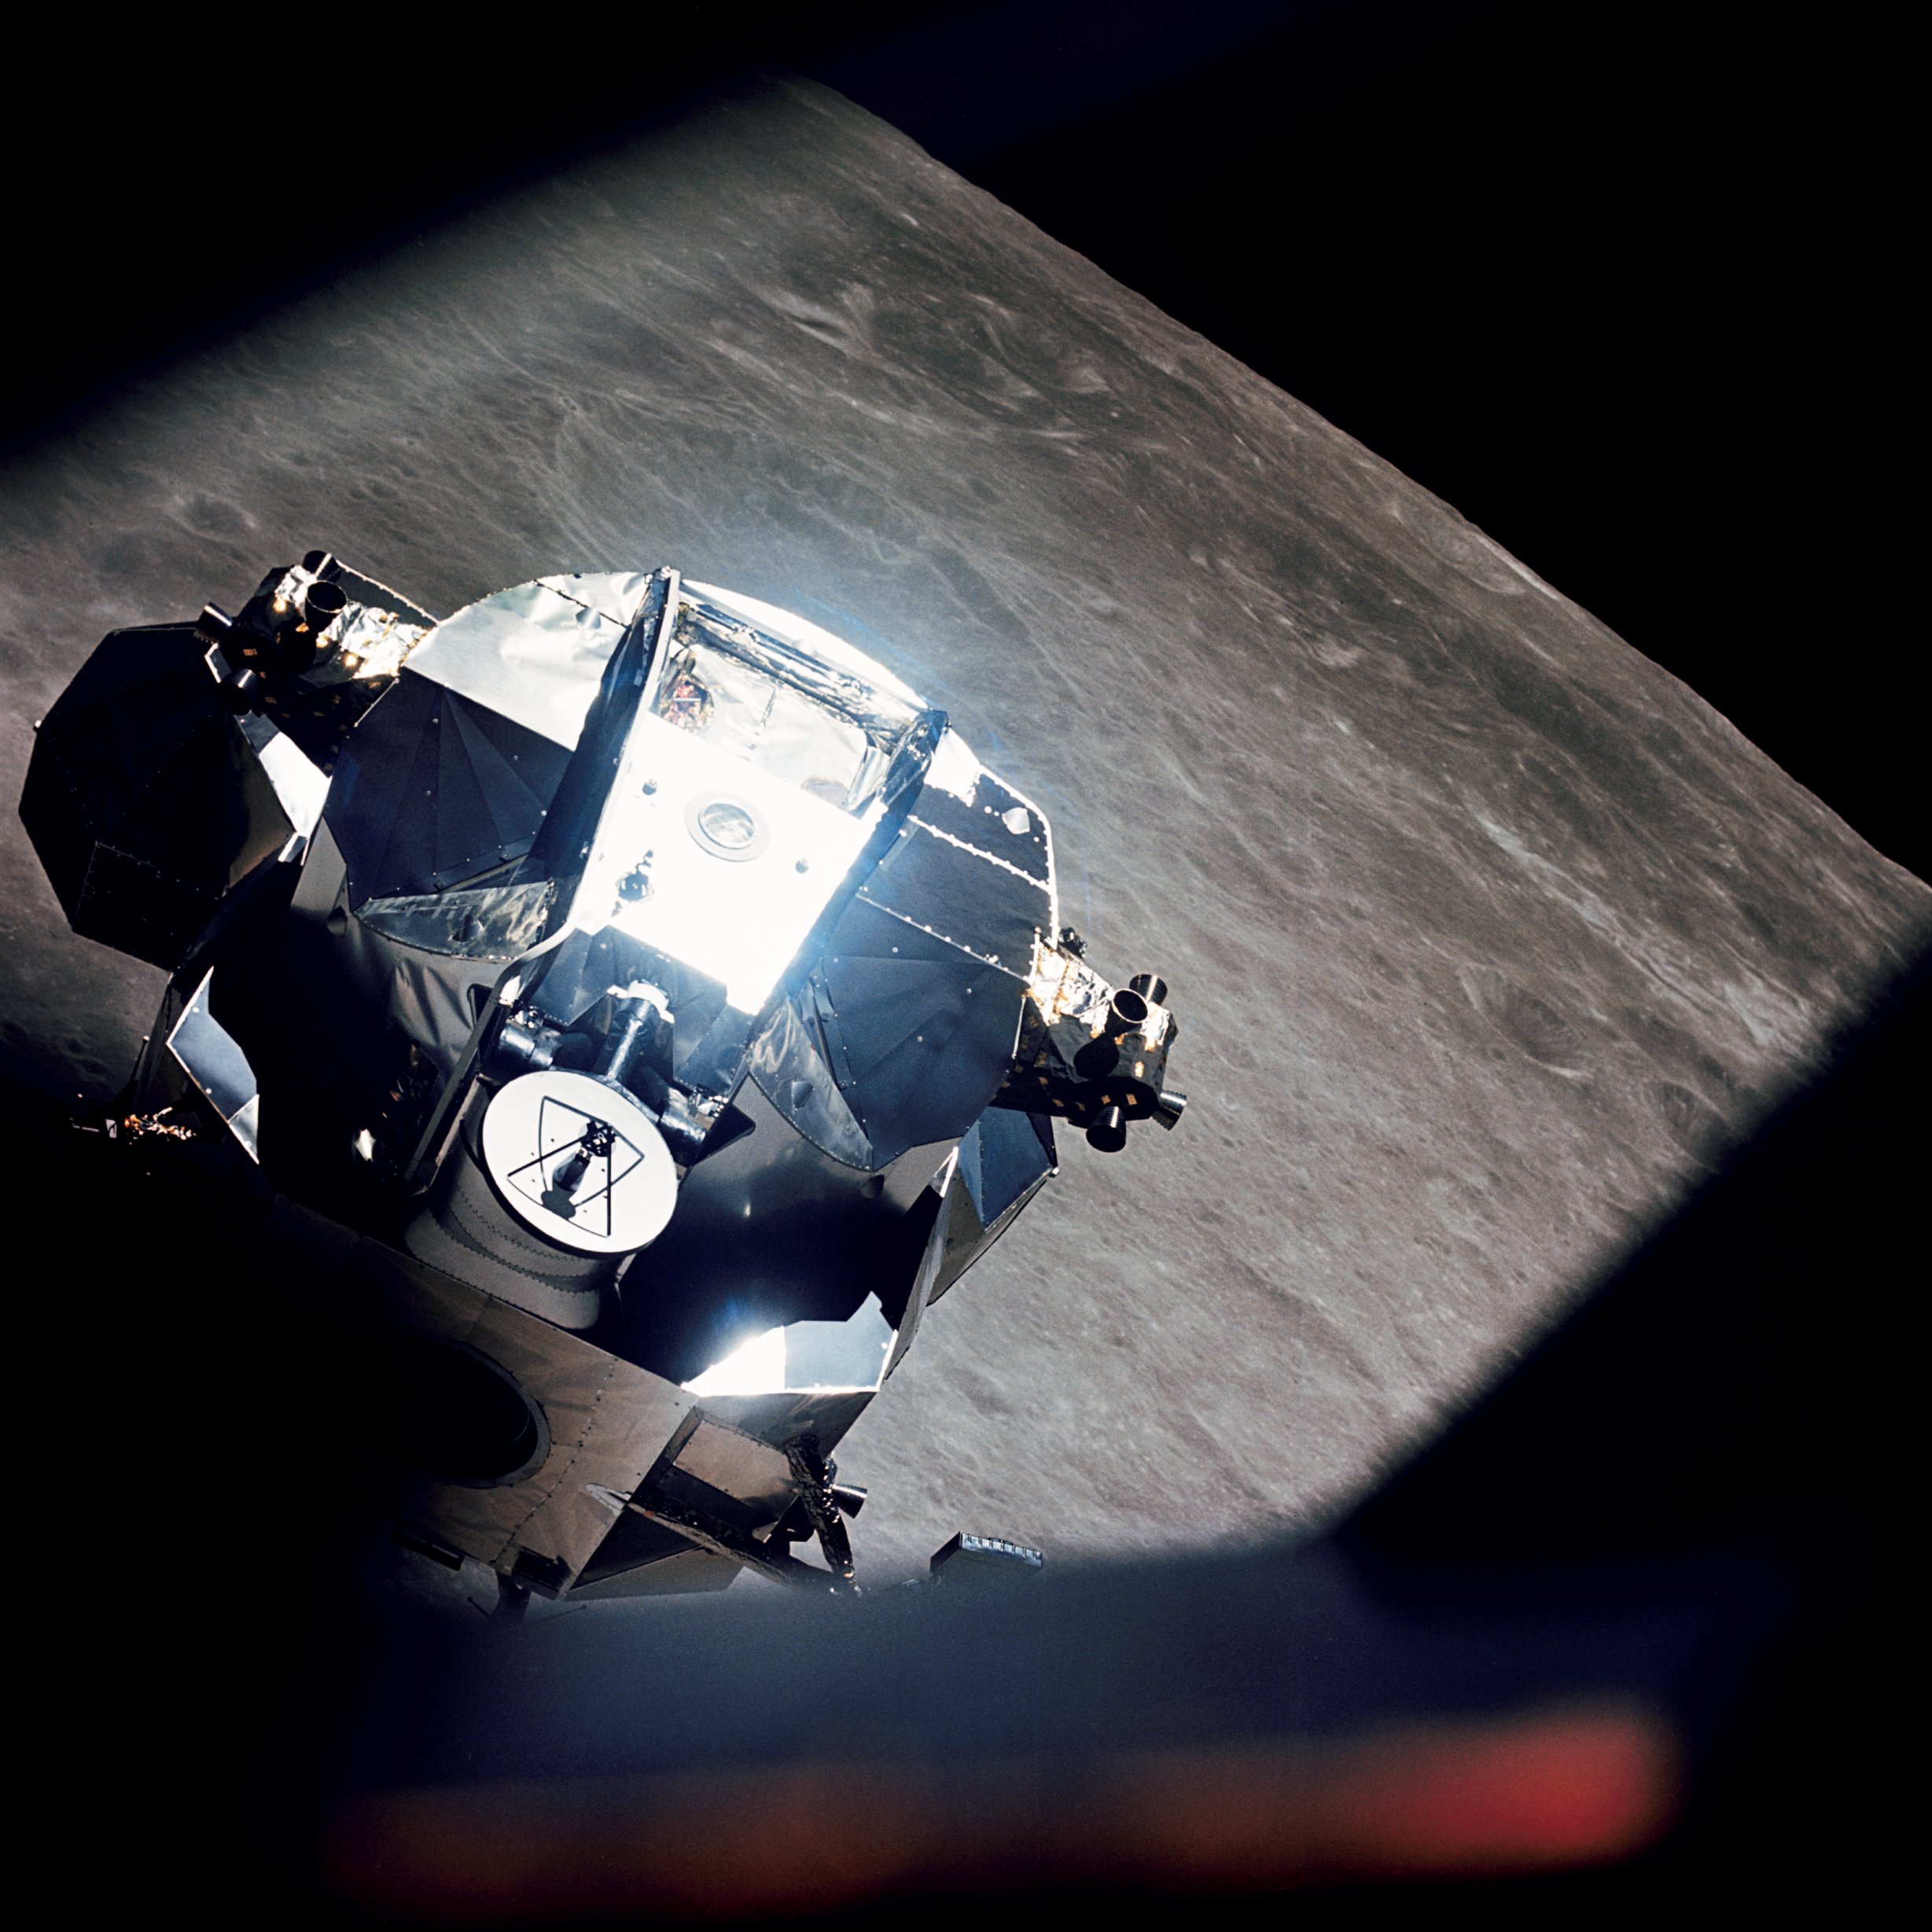 After descending to within 8.2 miles of the Moon's surface, Lunar Module Snoopy rendezvous with Command Module Charlie Brown in Lunar Orbit, 22 May 1969. (NASA)